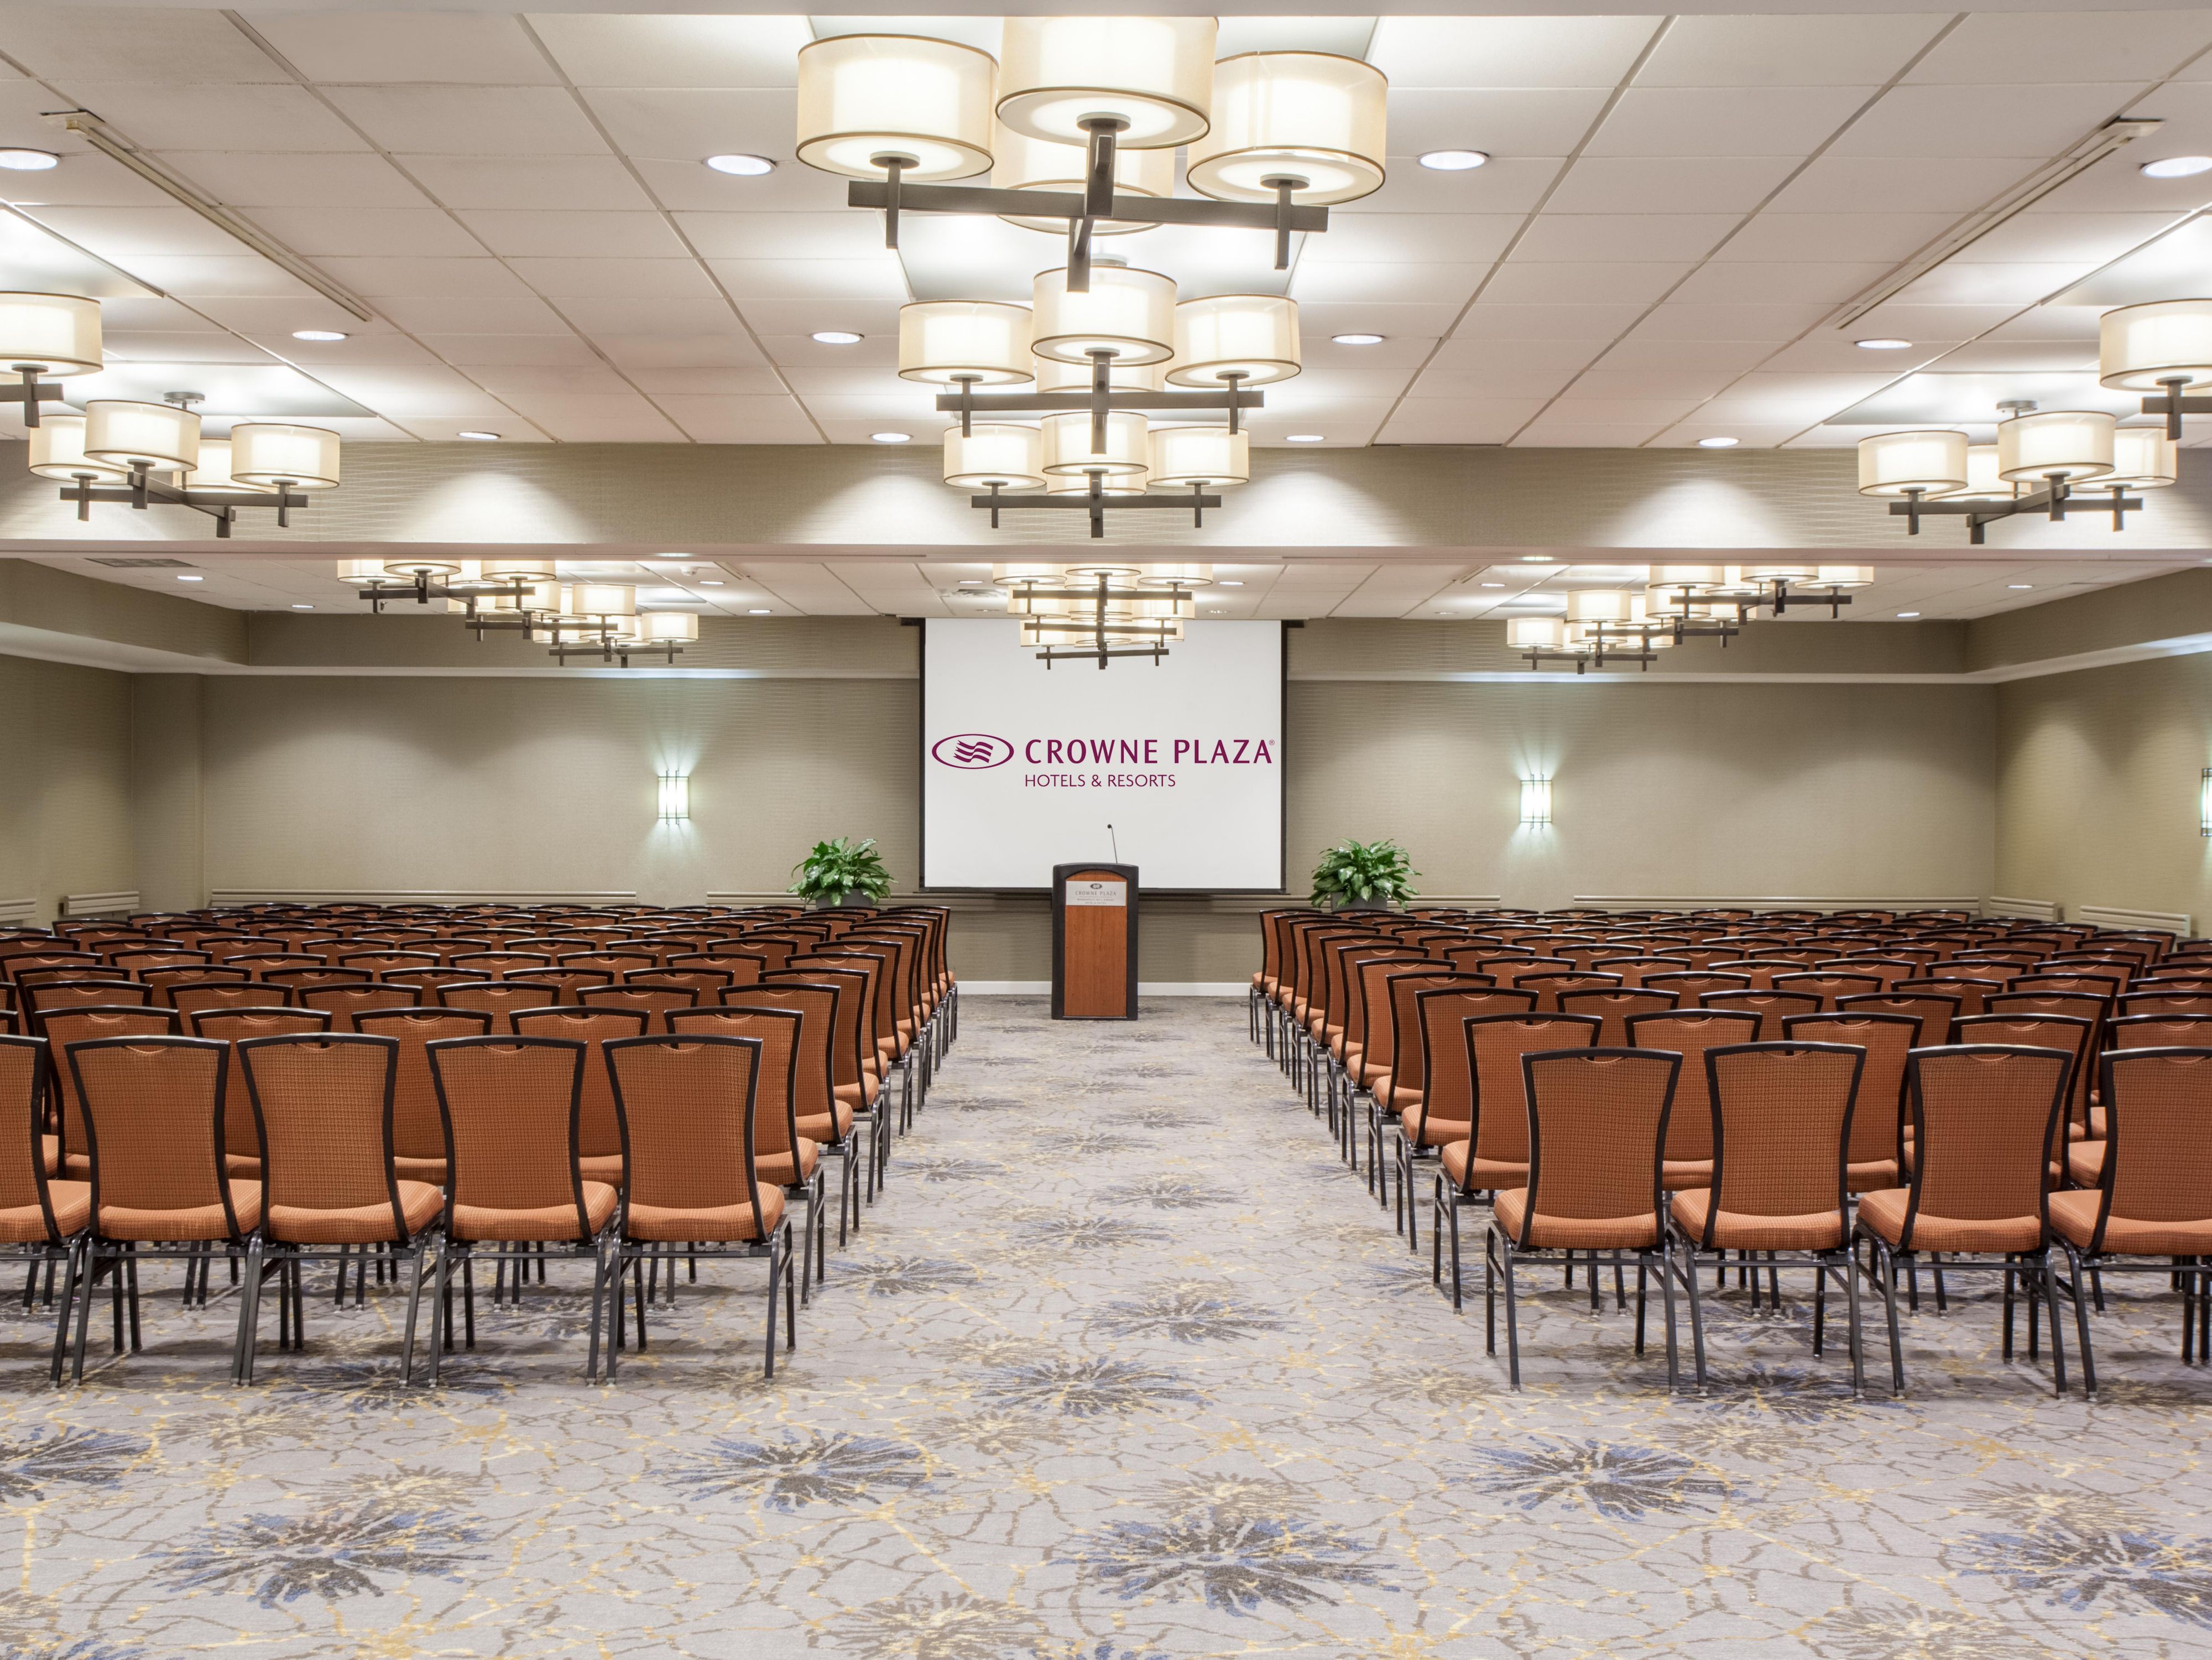 Host your Minneapolis meeting or event in our conveniently located hotel. With seven versatile venues and 8,000 sq ft of event space, including an elegant AiRE Ballroom, we can accommodate up to 300 guests. Catering, planning, and A/V services are available upon your request. 